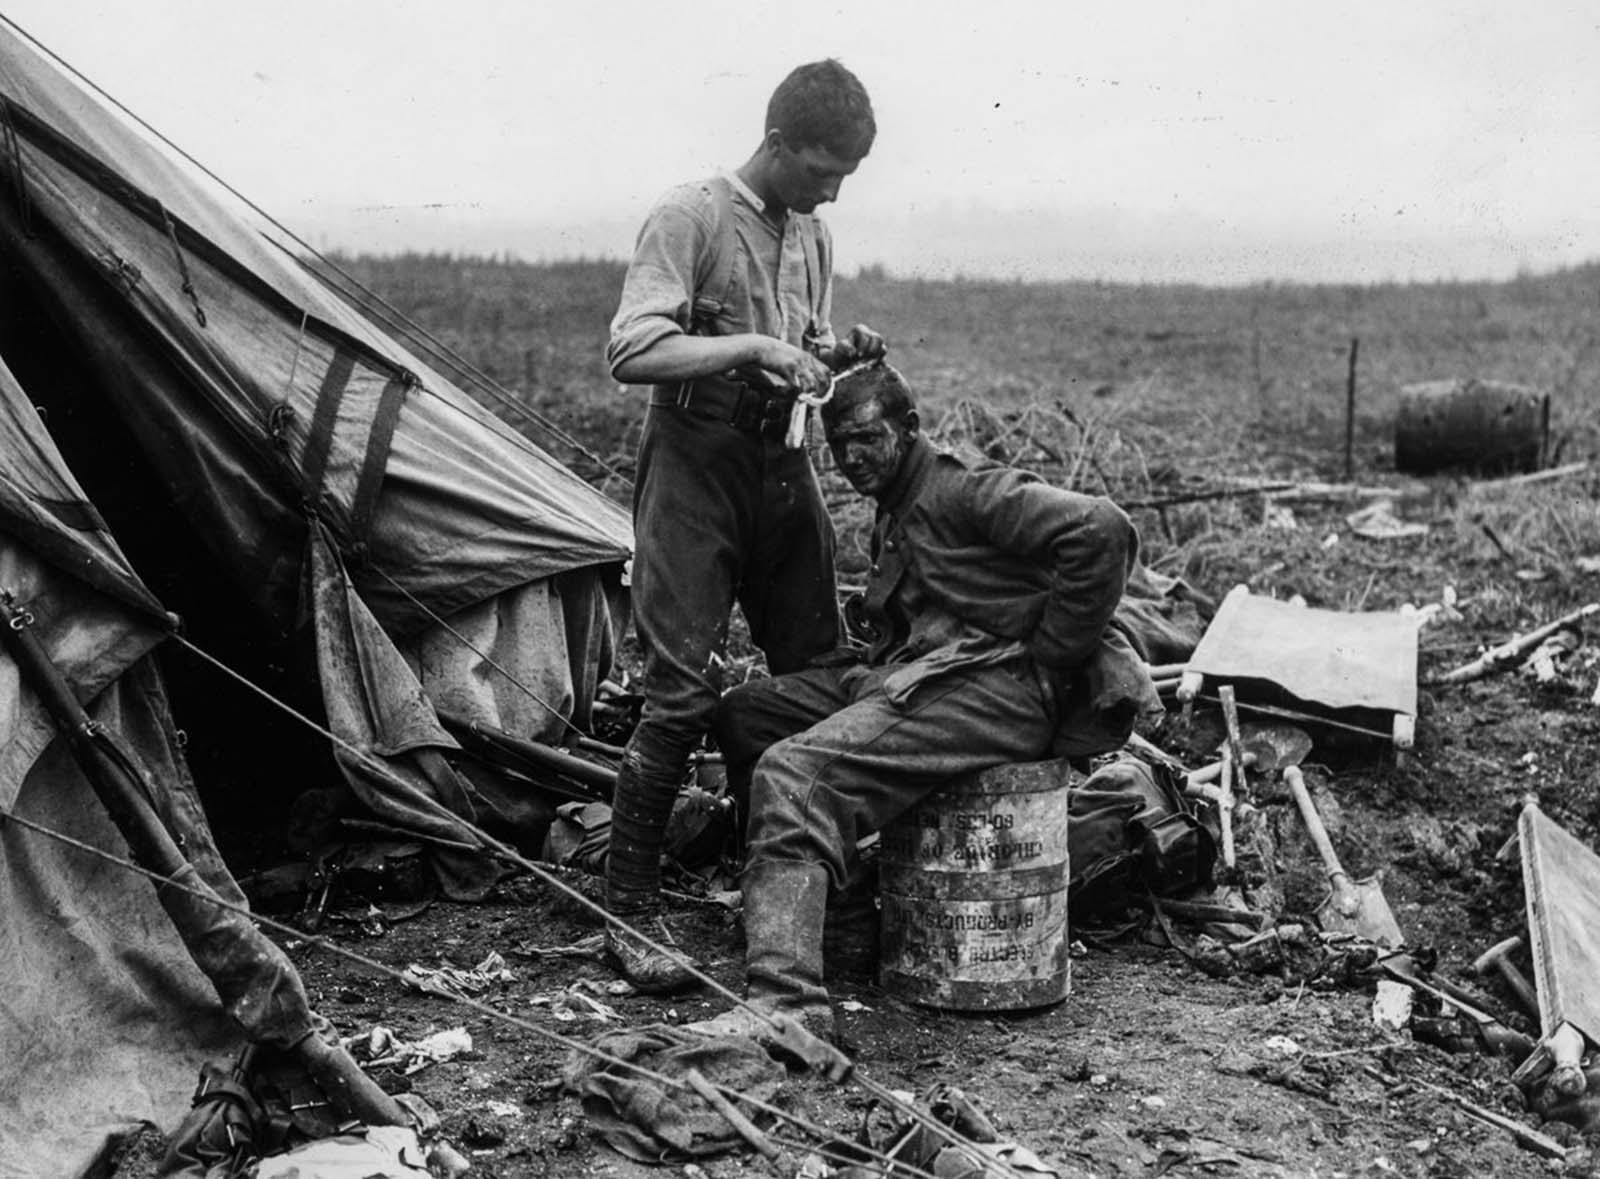 A British soldier dresses the wounds of a German prisoner near Bernafay Wood. July 19, 1916.